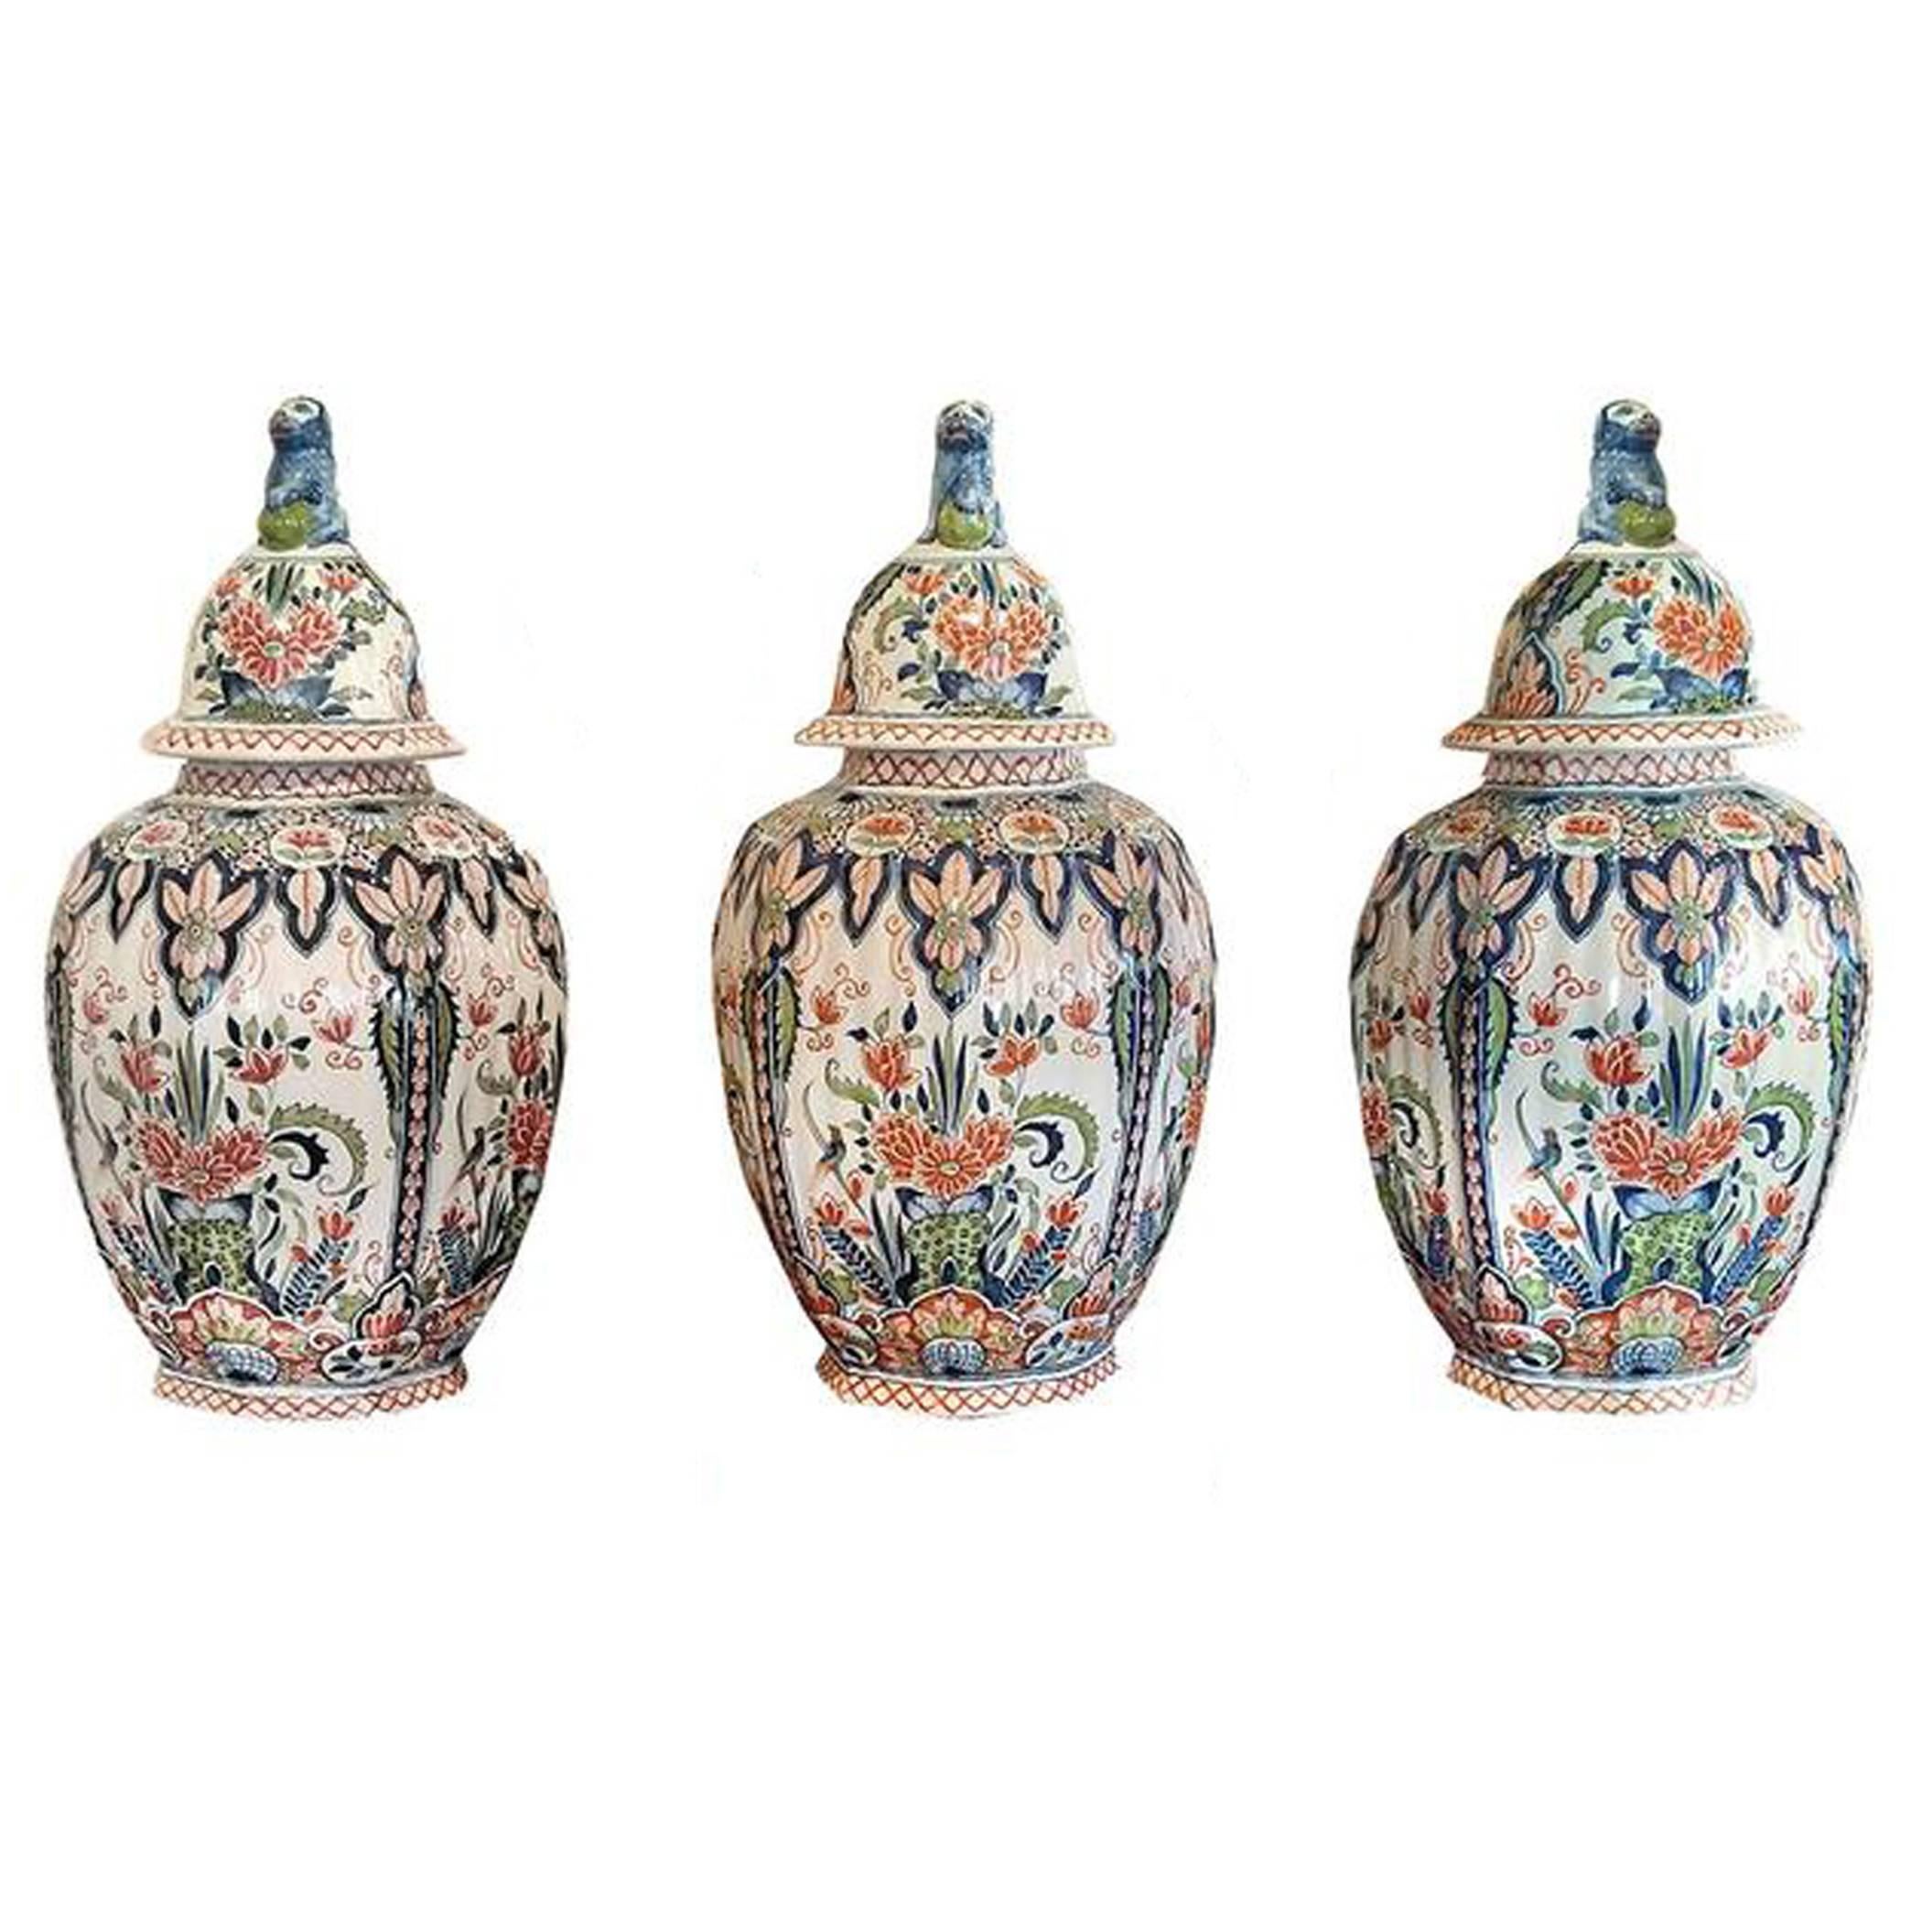 Five piece delft garniture set consisting of three lidded lobed urns; lids surmounted with regal lions in repose; two octagonal tapered lobed vases. Blue, red and green predominantly; series of medallions, flowers, geometric borders; 19th century.